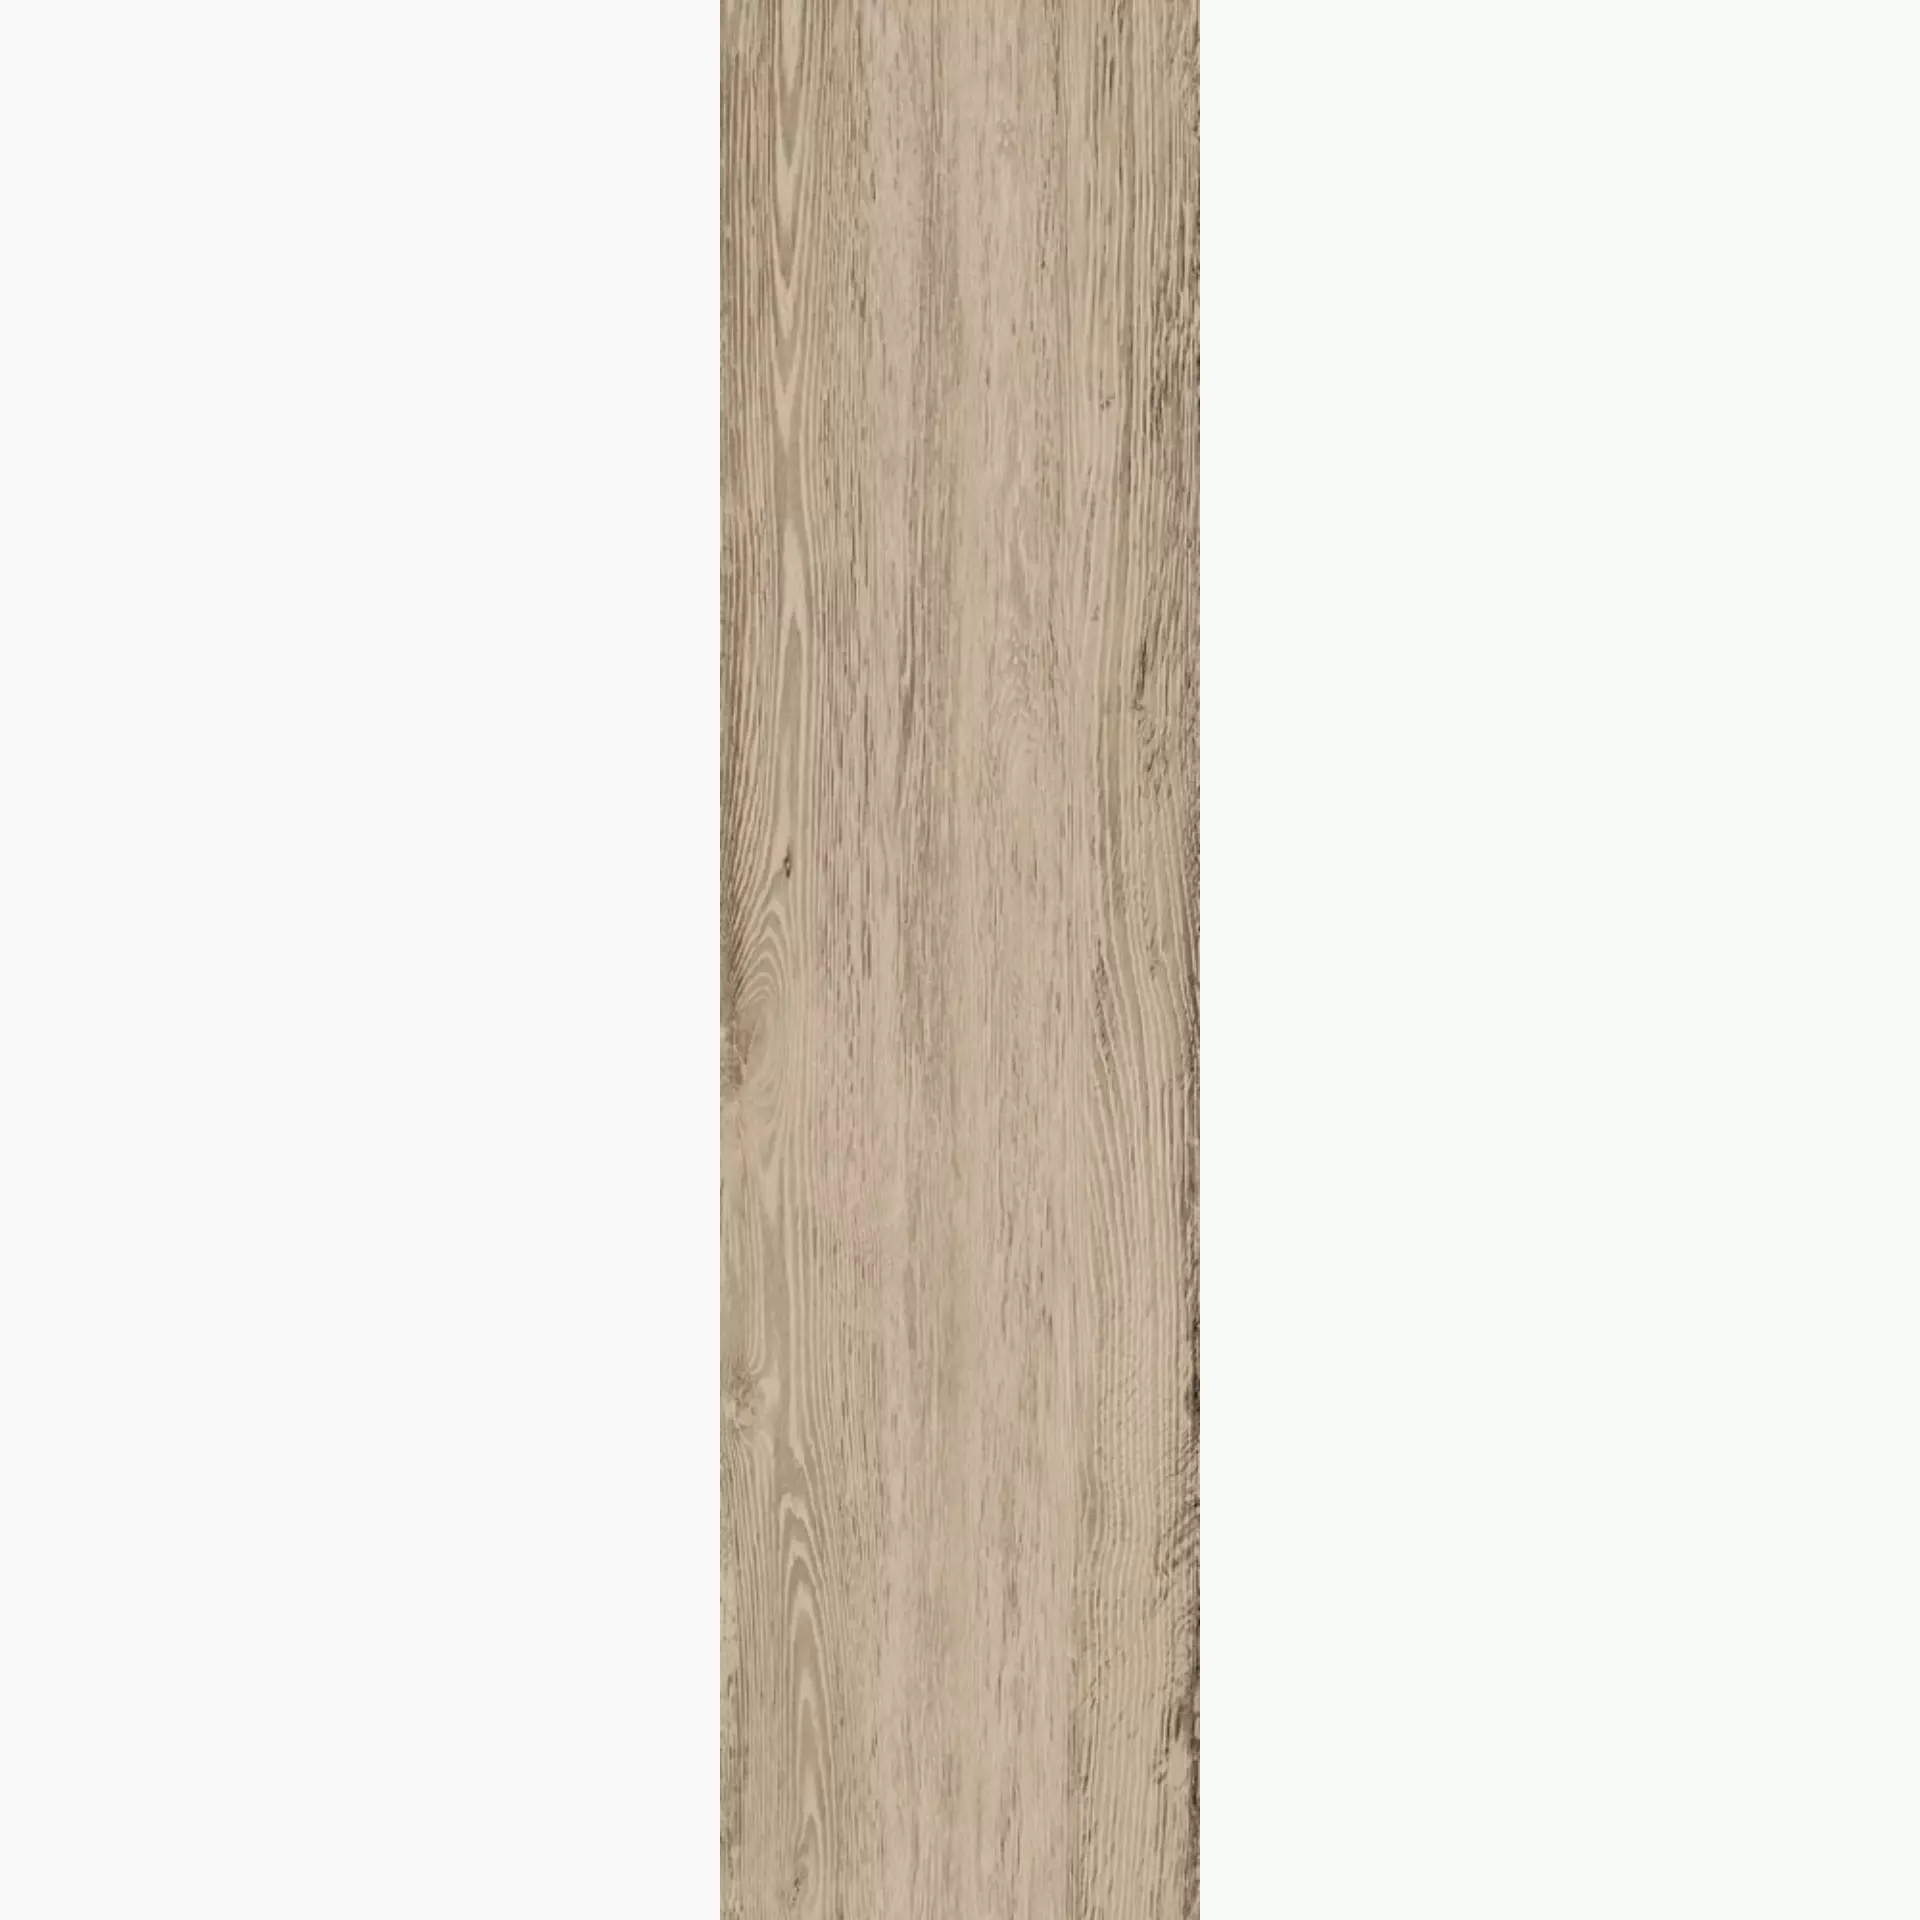 Sant Agostino Sunwood Almond Natural CSASNA3012 30x120cm rectified 9mm